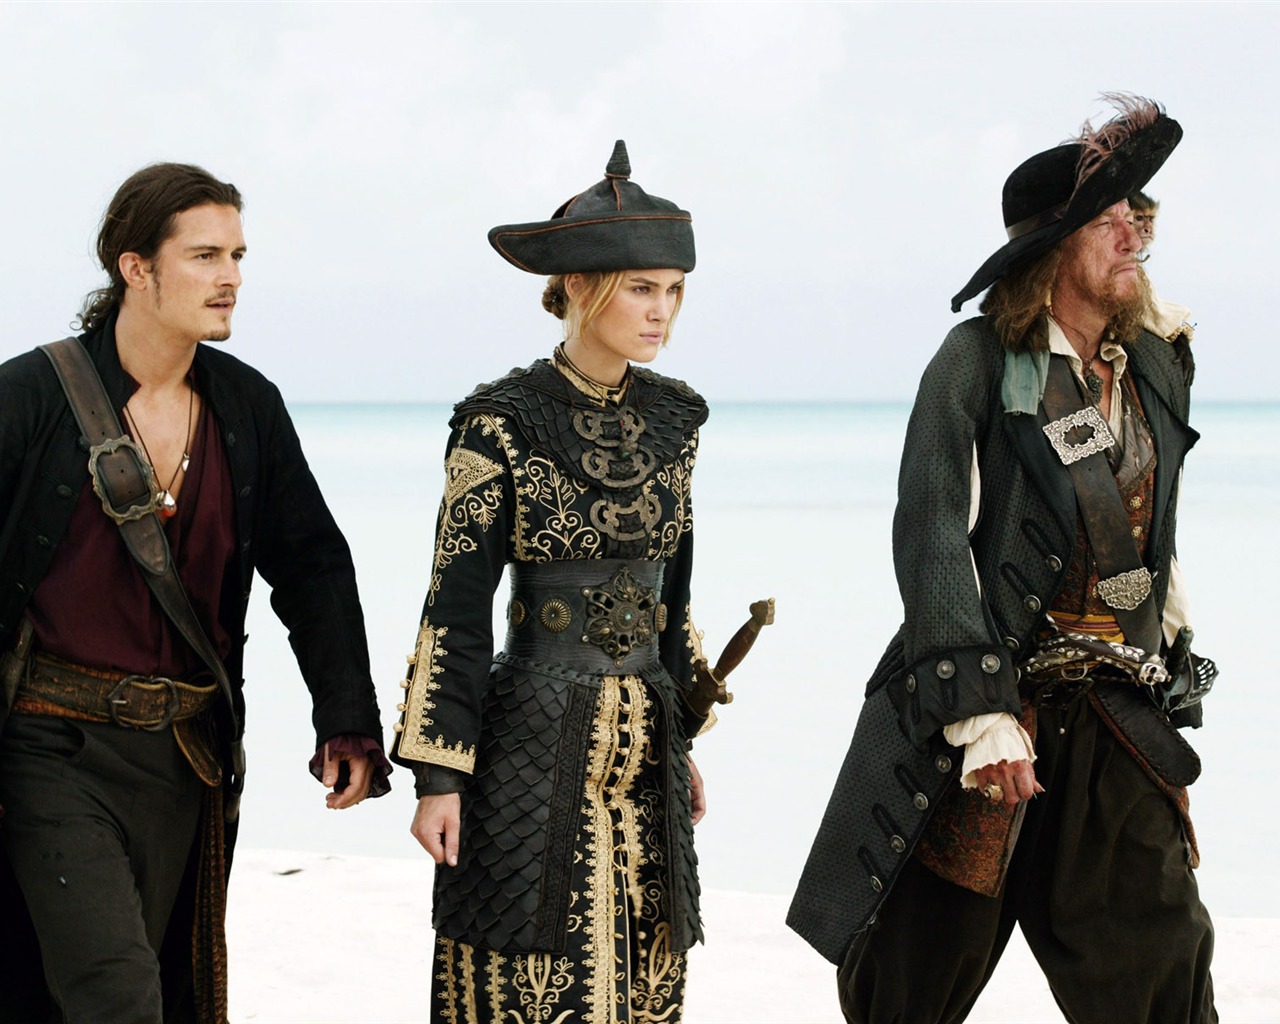 Pirates of the Caribbean 3 HD Wallpapers #14 - 1280x1024